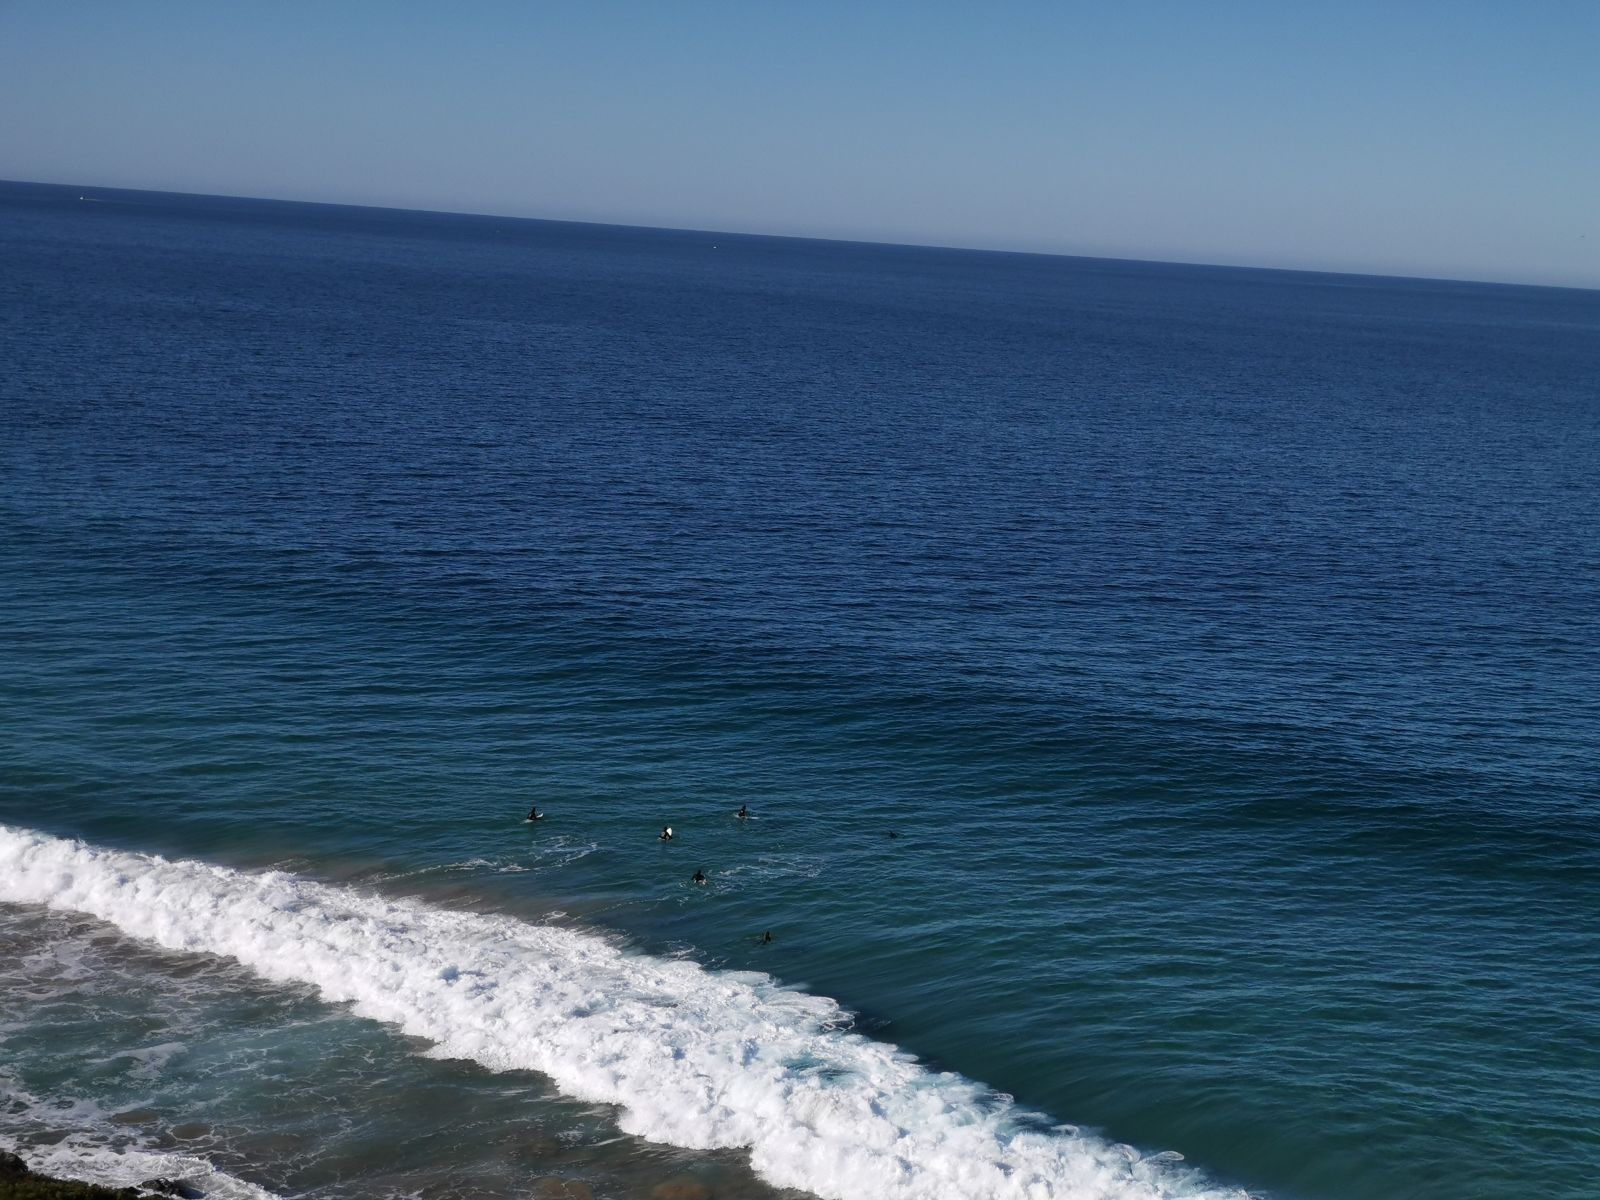 You can barely see the surfers. I only had my phone for pictures, you would have needed some serious photography gear to capture the dolphin. So you’ll just have to take my word for it.